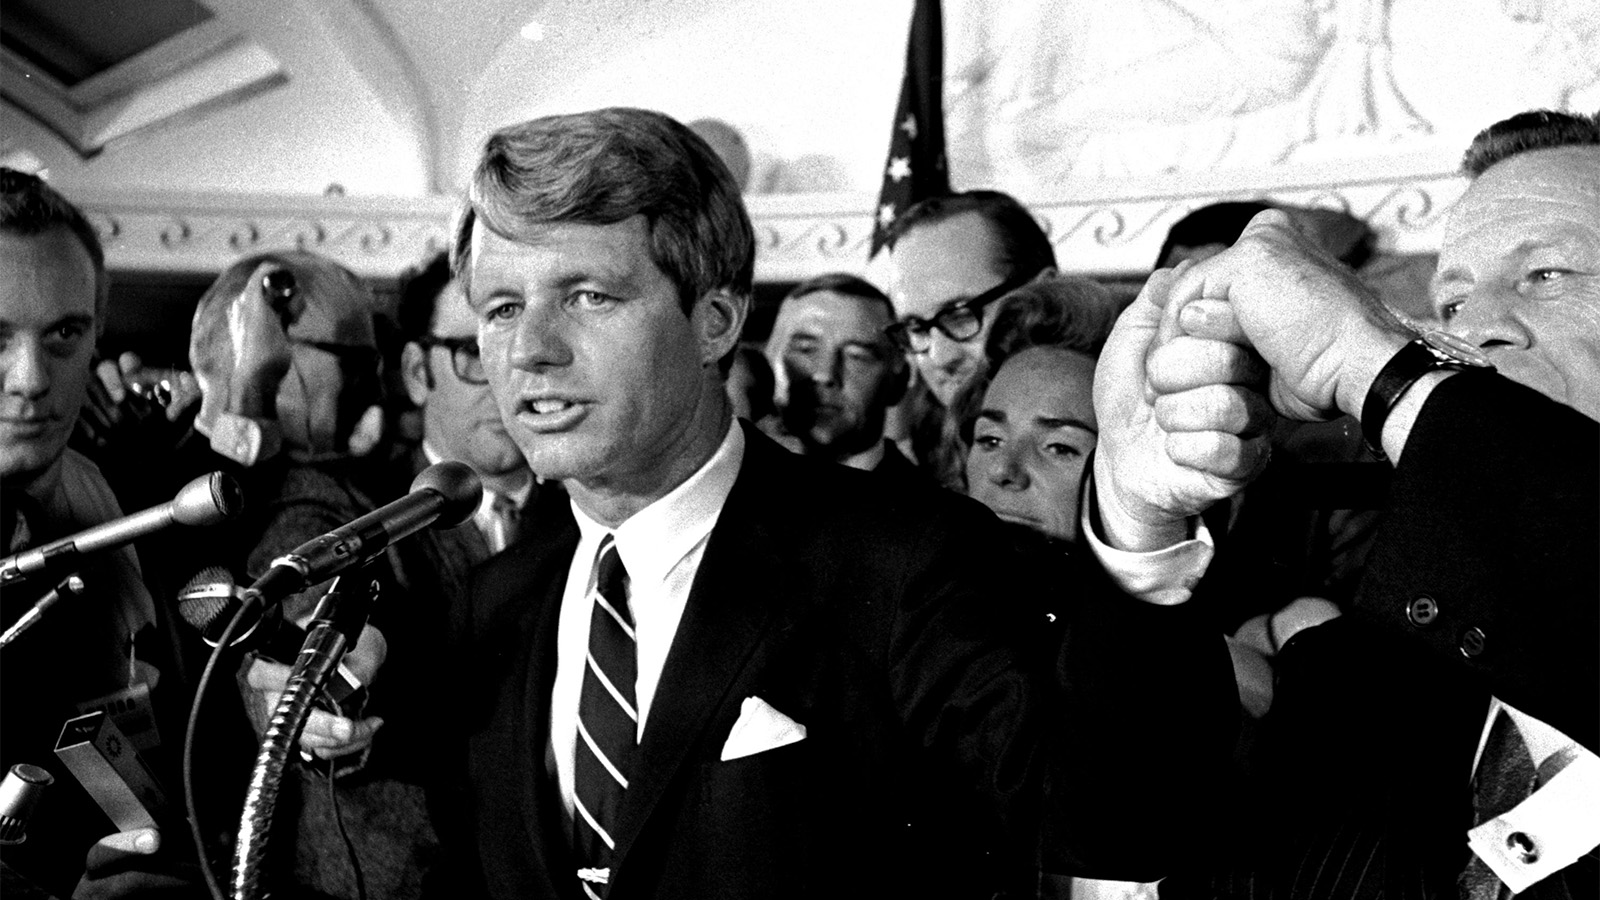 Sen. Robert F. Kennedy addresses a throng of supporters in the Ambassador Hotel in Los Angeles early in the morning of June 5, 1968, following his victory in the previous day's California primary election. A moment later he turned into a hotel kitchen corridor and was critically wounded. His wife, Ethel, is just behind him. (AP Photo/Dick Strobel)